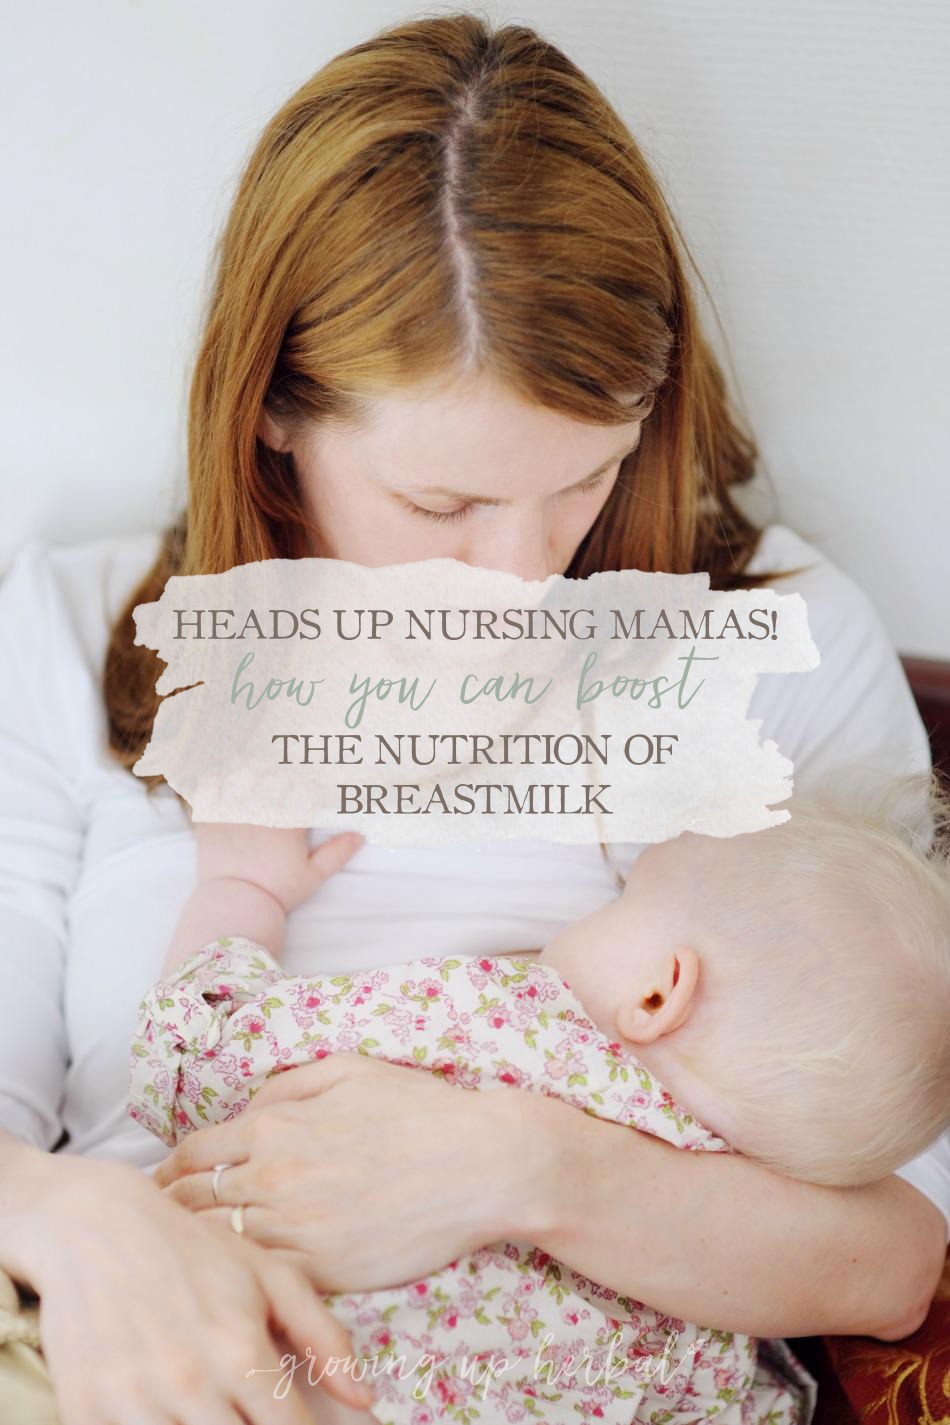 Heads Up Nursing Mamas! Here's How You Can Boost The Nutrition Of Breastmilk | Growing Up Herbal | Learn how to easily boost the nutrition of mother's milk with food, herbs, and the outdoors!